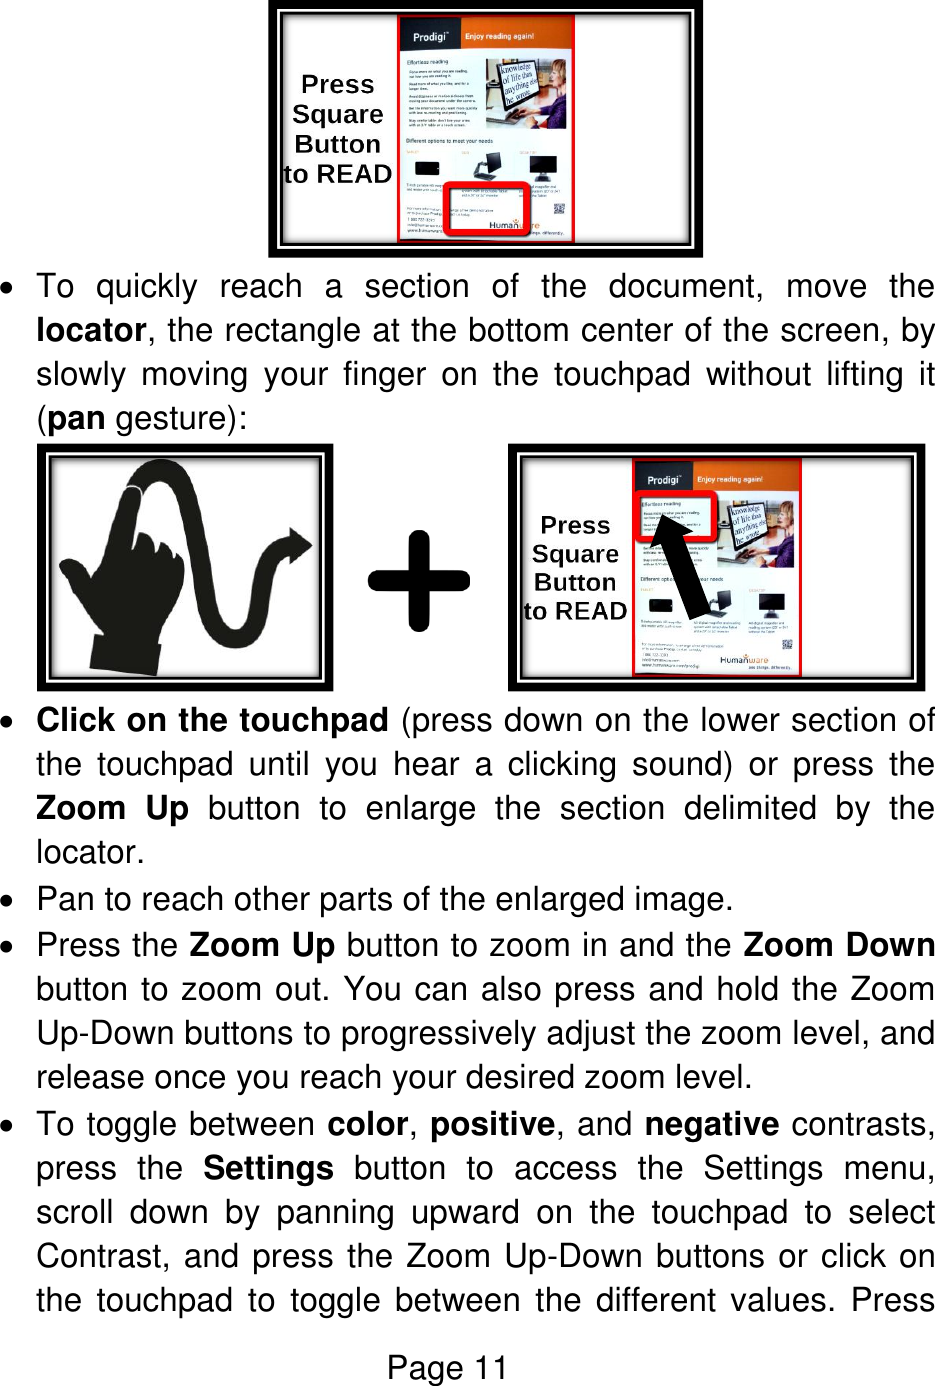 Page 11     To  quickly  reach  a  section  of  the  document,  move  the locator, the rectangle at the bottom center of the screen, by slowly  moving  your  finger  on  the  touchpad  without  lifting  it (pan gesture):             Click on the touchpad (press down on the lower section of the  touchpad  until  you  hear  a  clicking  sound)  or  press  the Zoom  Up  button  to  enlarge  the  section  delimited  by  the locator.   Pan to reach other parts of the enlarged image.   Press the Zoom Up button to zoom in and the Zoom Down button to zoom out. You can also press and hold the Zoom Up-Down buttons to progressively adjust the zoom level, and release once you reach your desired zoom level.    To toggle between color, positive, and negative contrasts, press  the  Settings  button  to  access  the  Settings  menu, scroll  down  by  panning  upward  on  the  touchpad  to  select Contrast, and press the Zoom Up-Down buttons or click on the touchpad  to  toggle between  the different values.  Press 